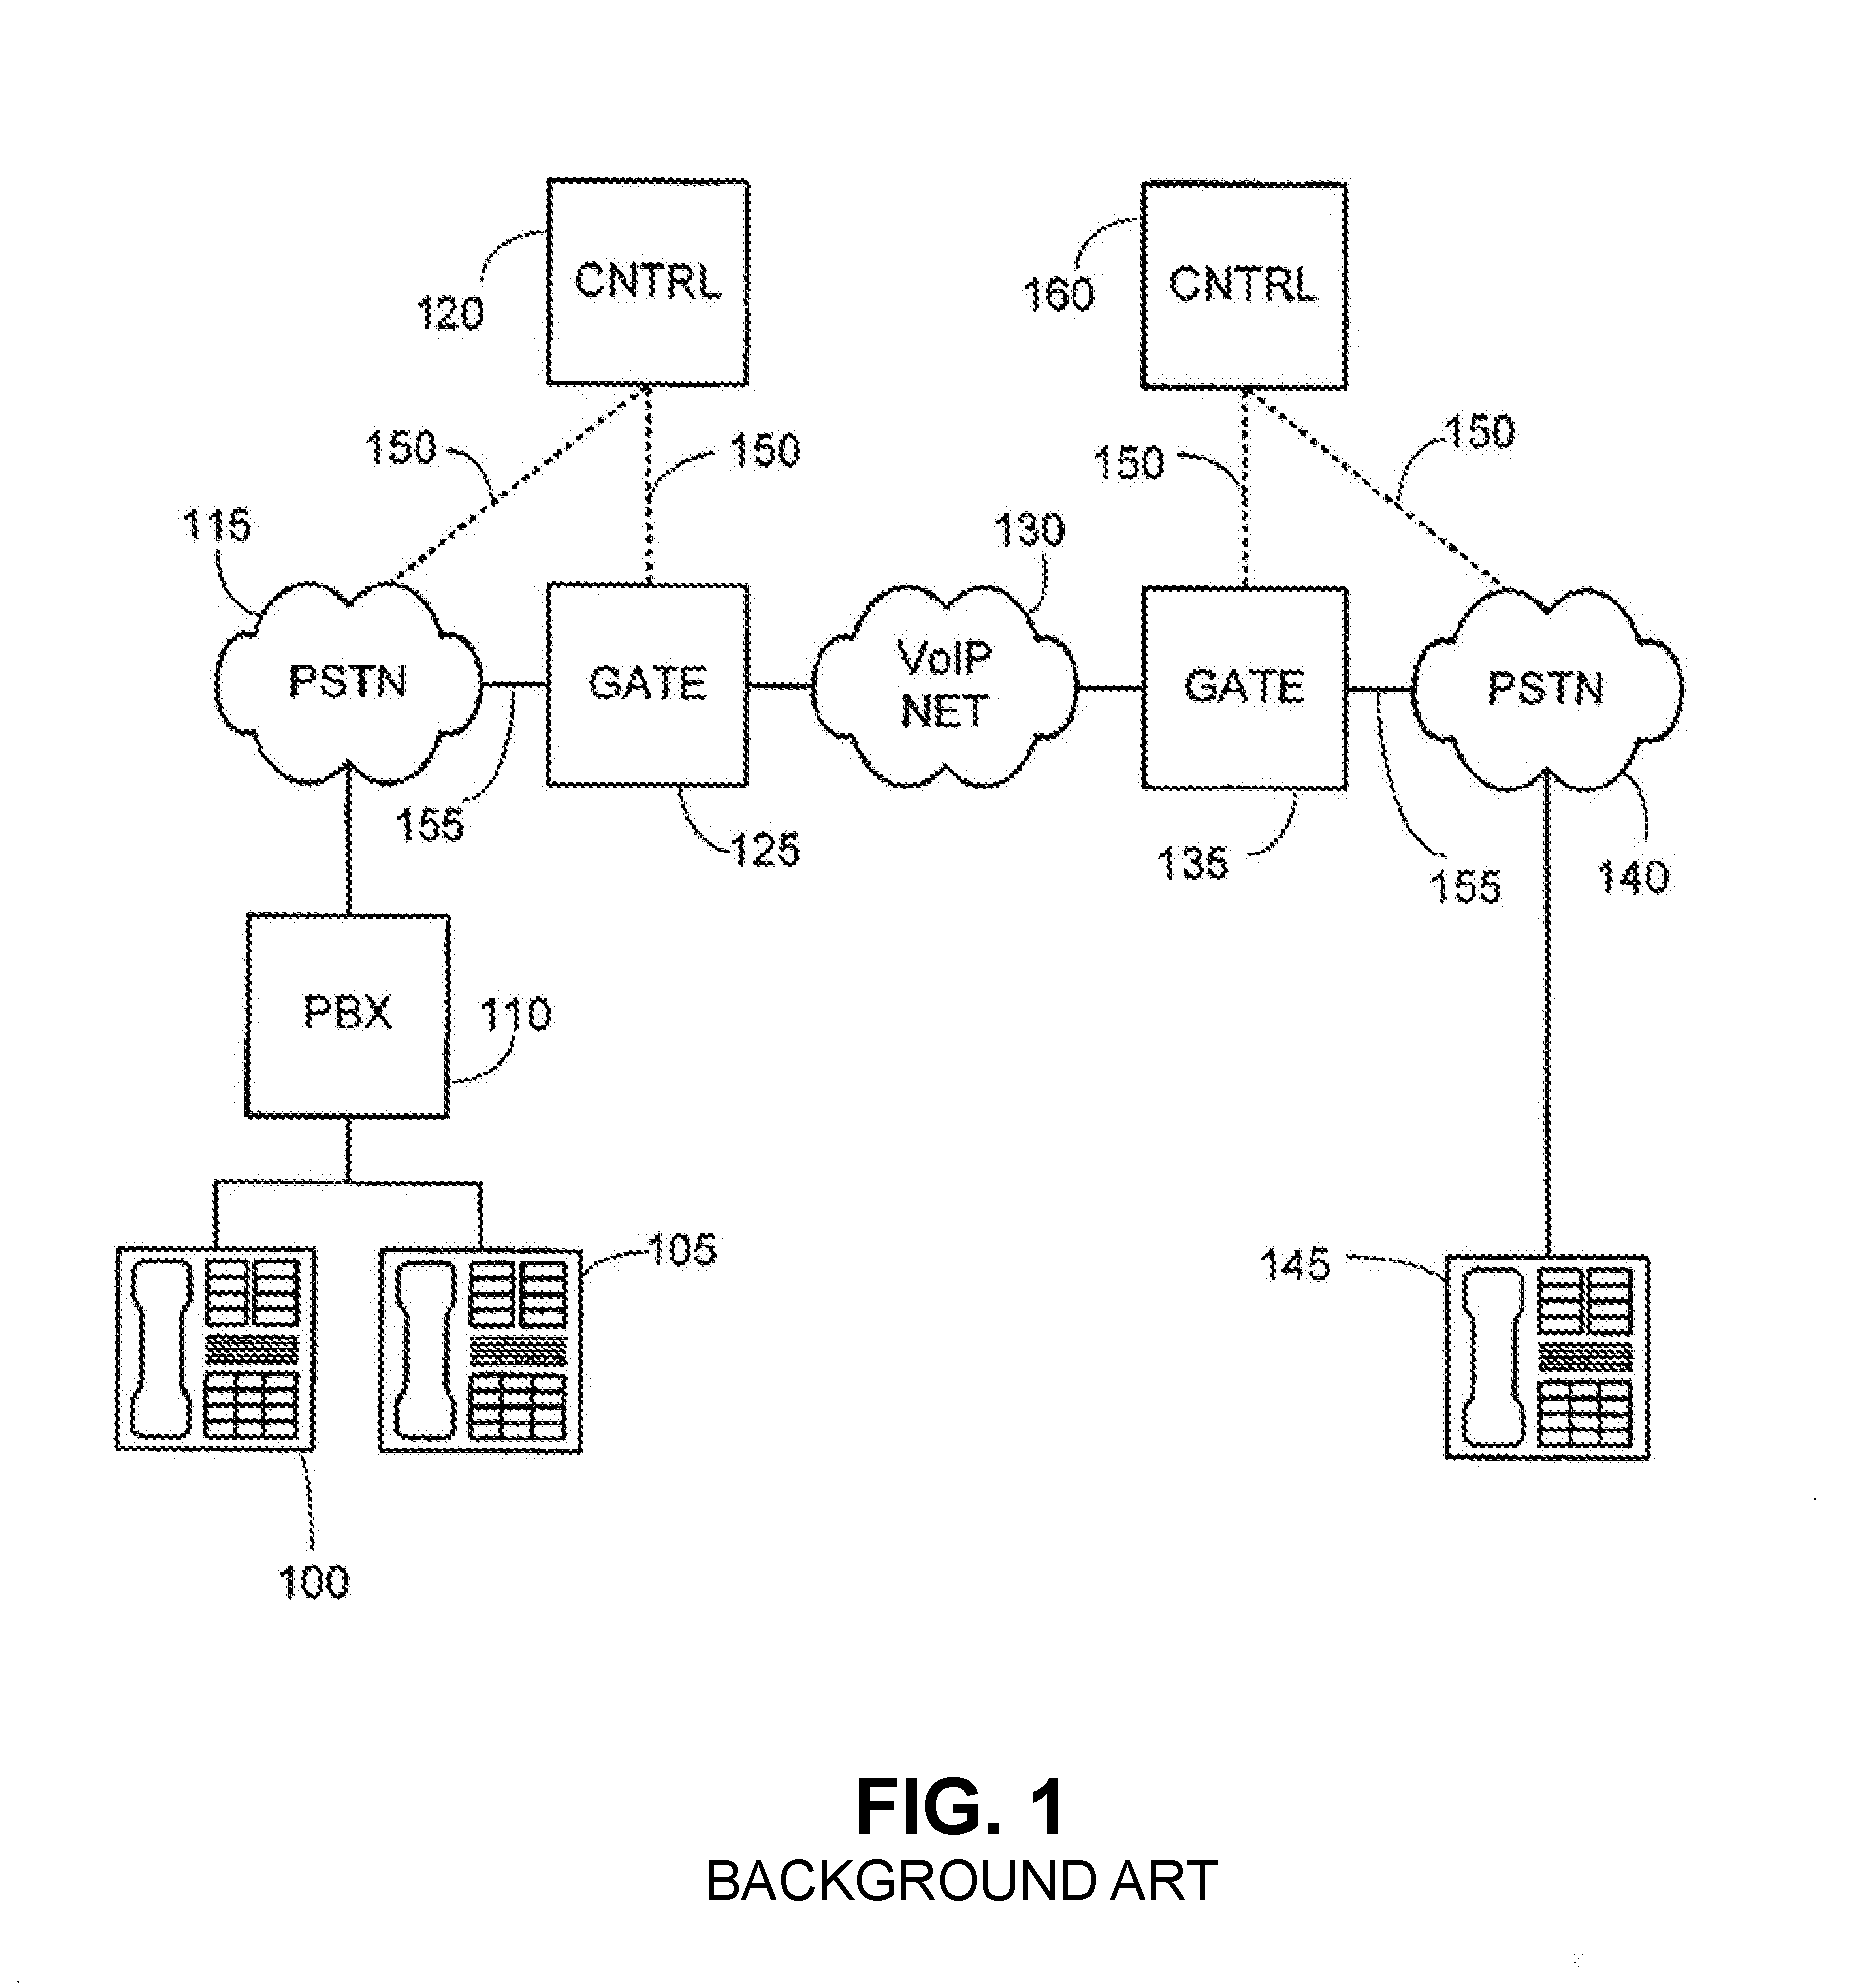 System and method for monitoring the volume of calls carried by a voice over internet protocol telephone system